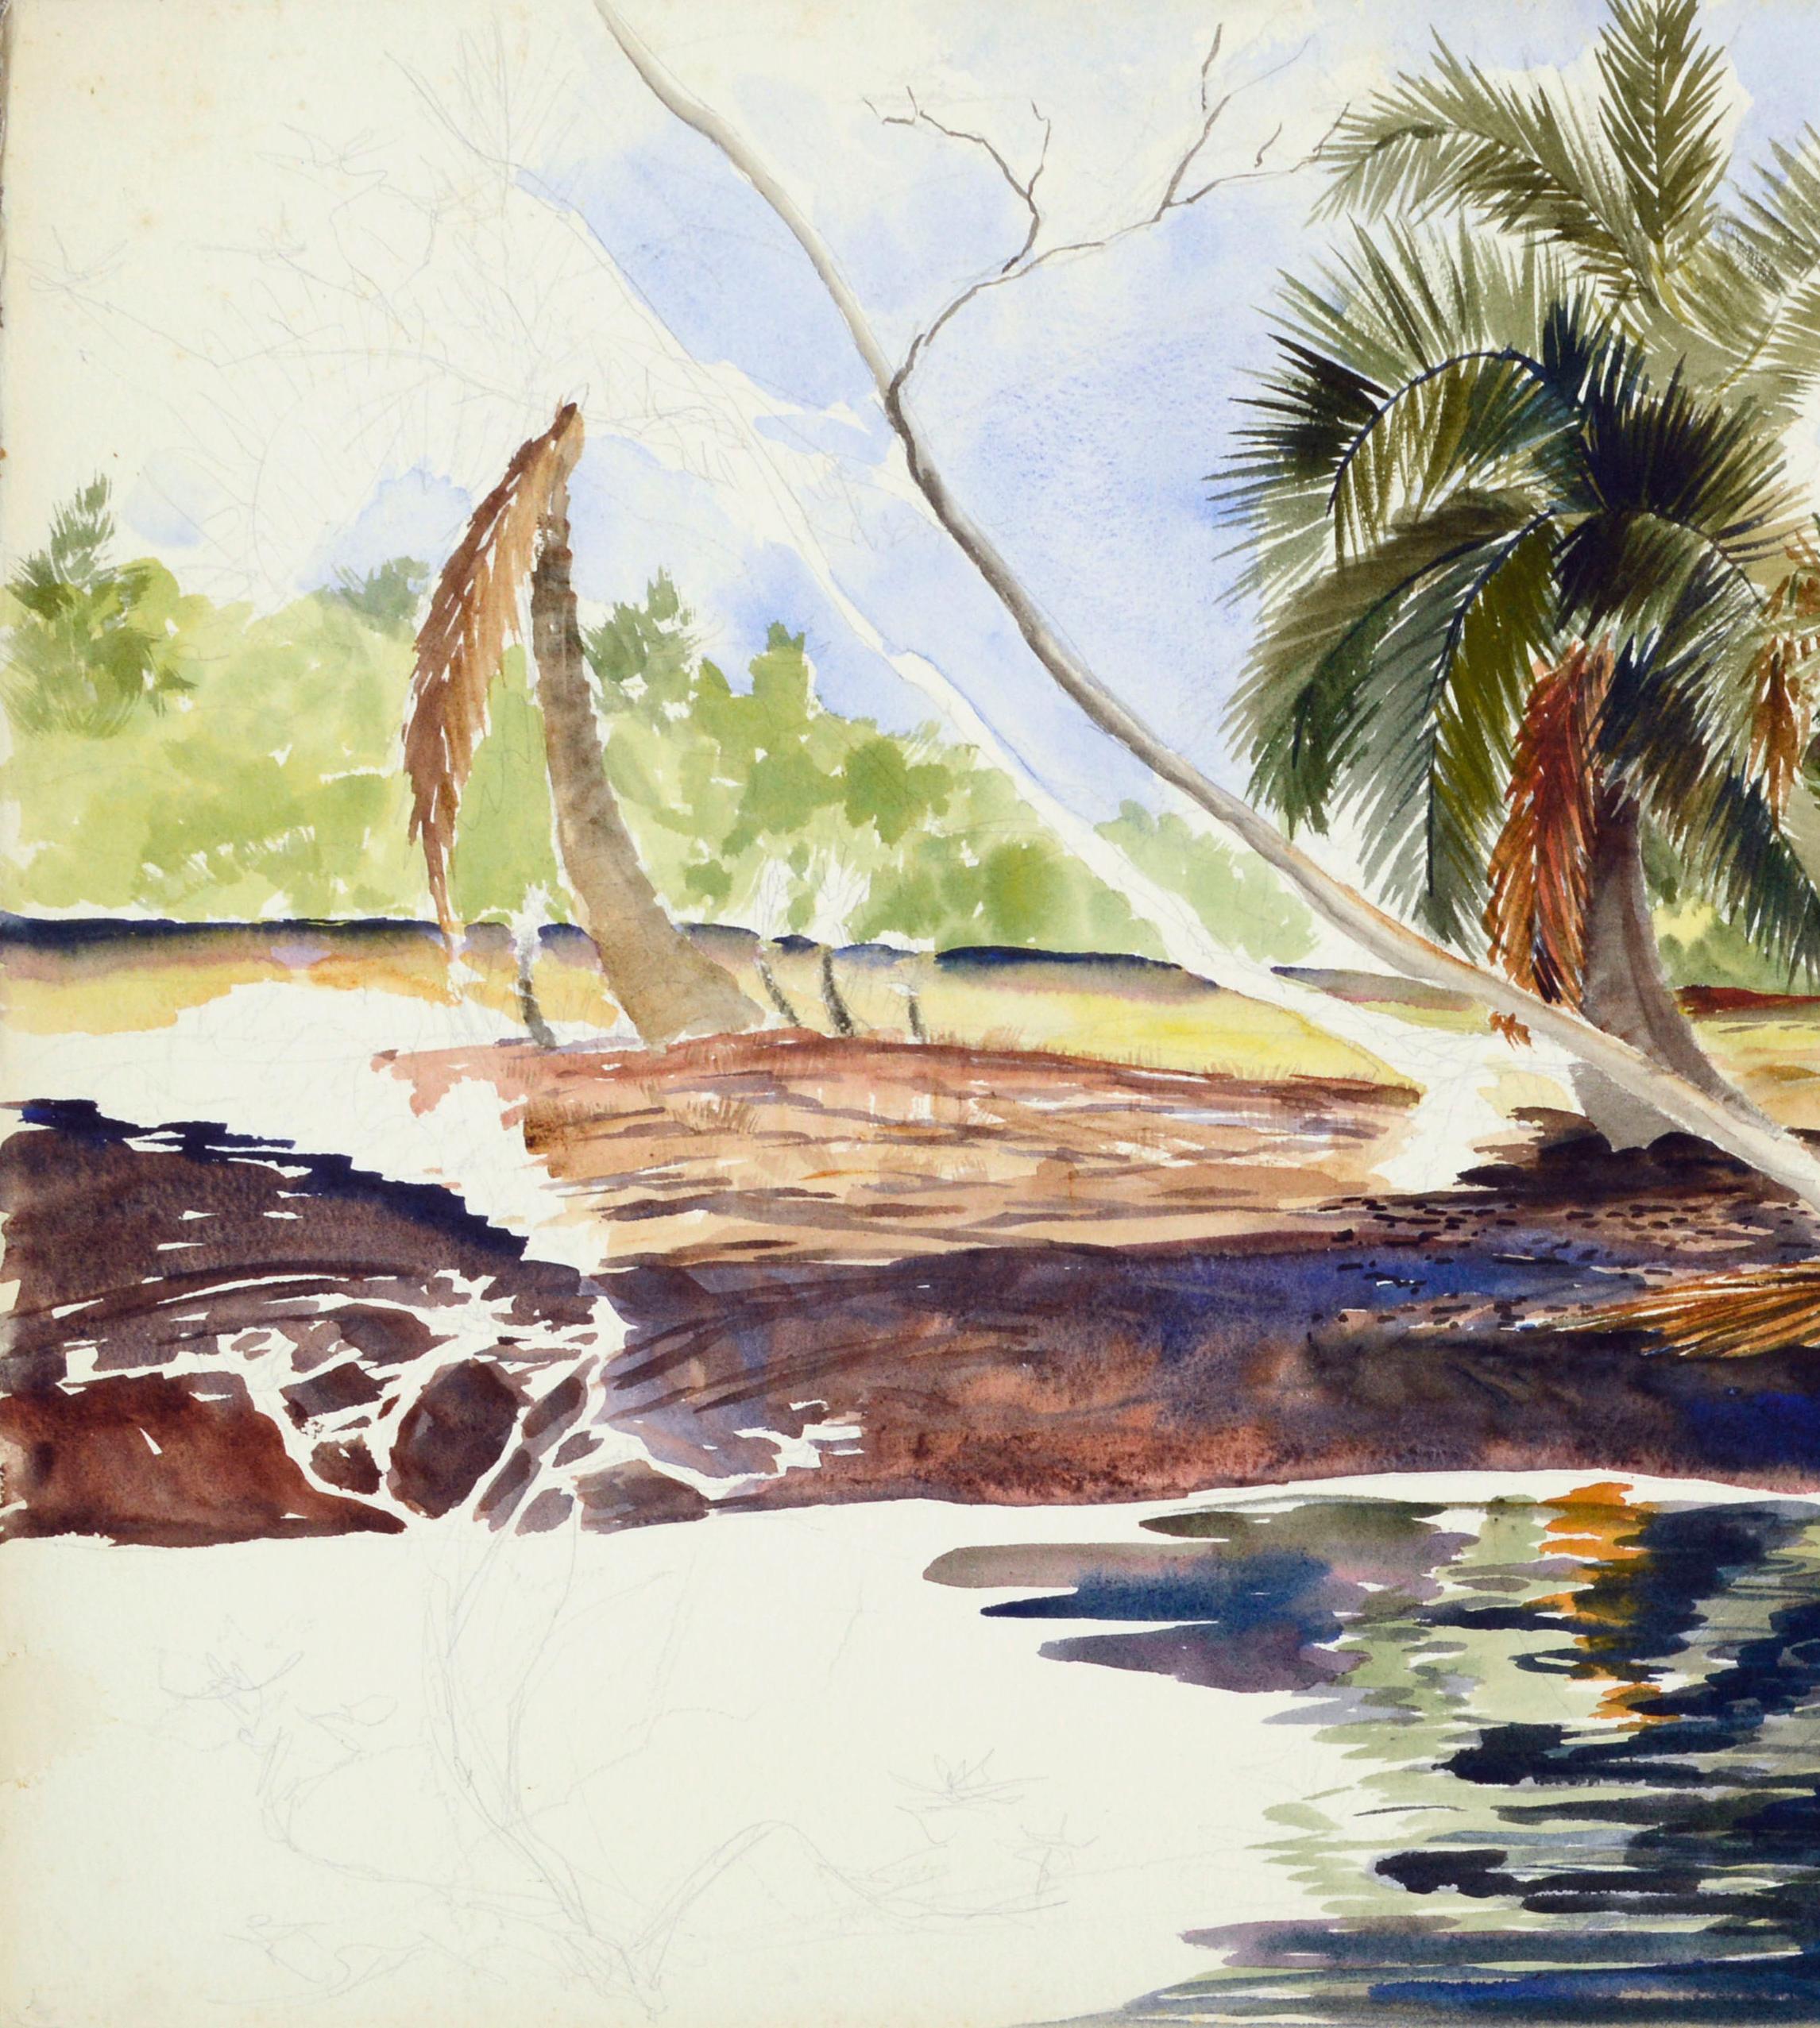 Tropical Palms (unfinished work) - American Realist Art by Joseph Yeager